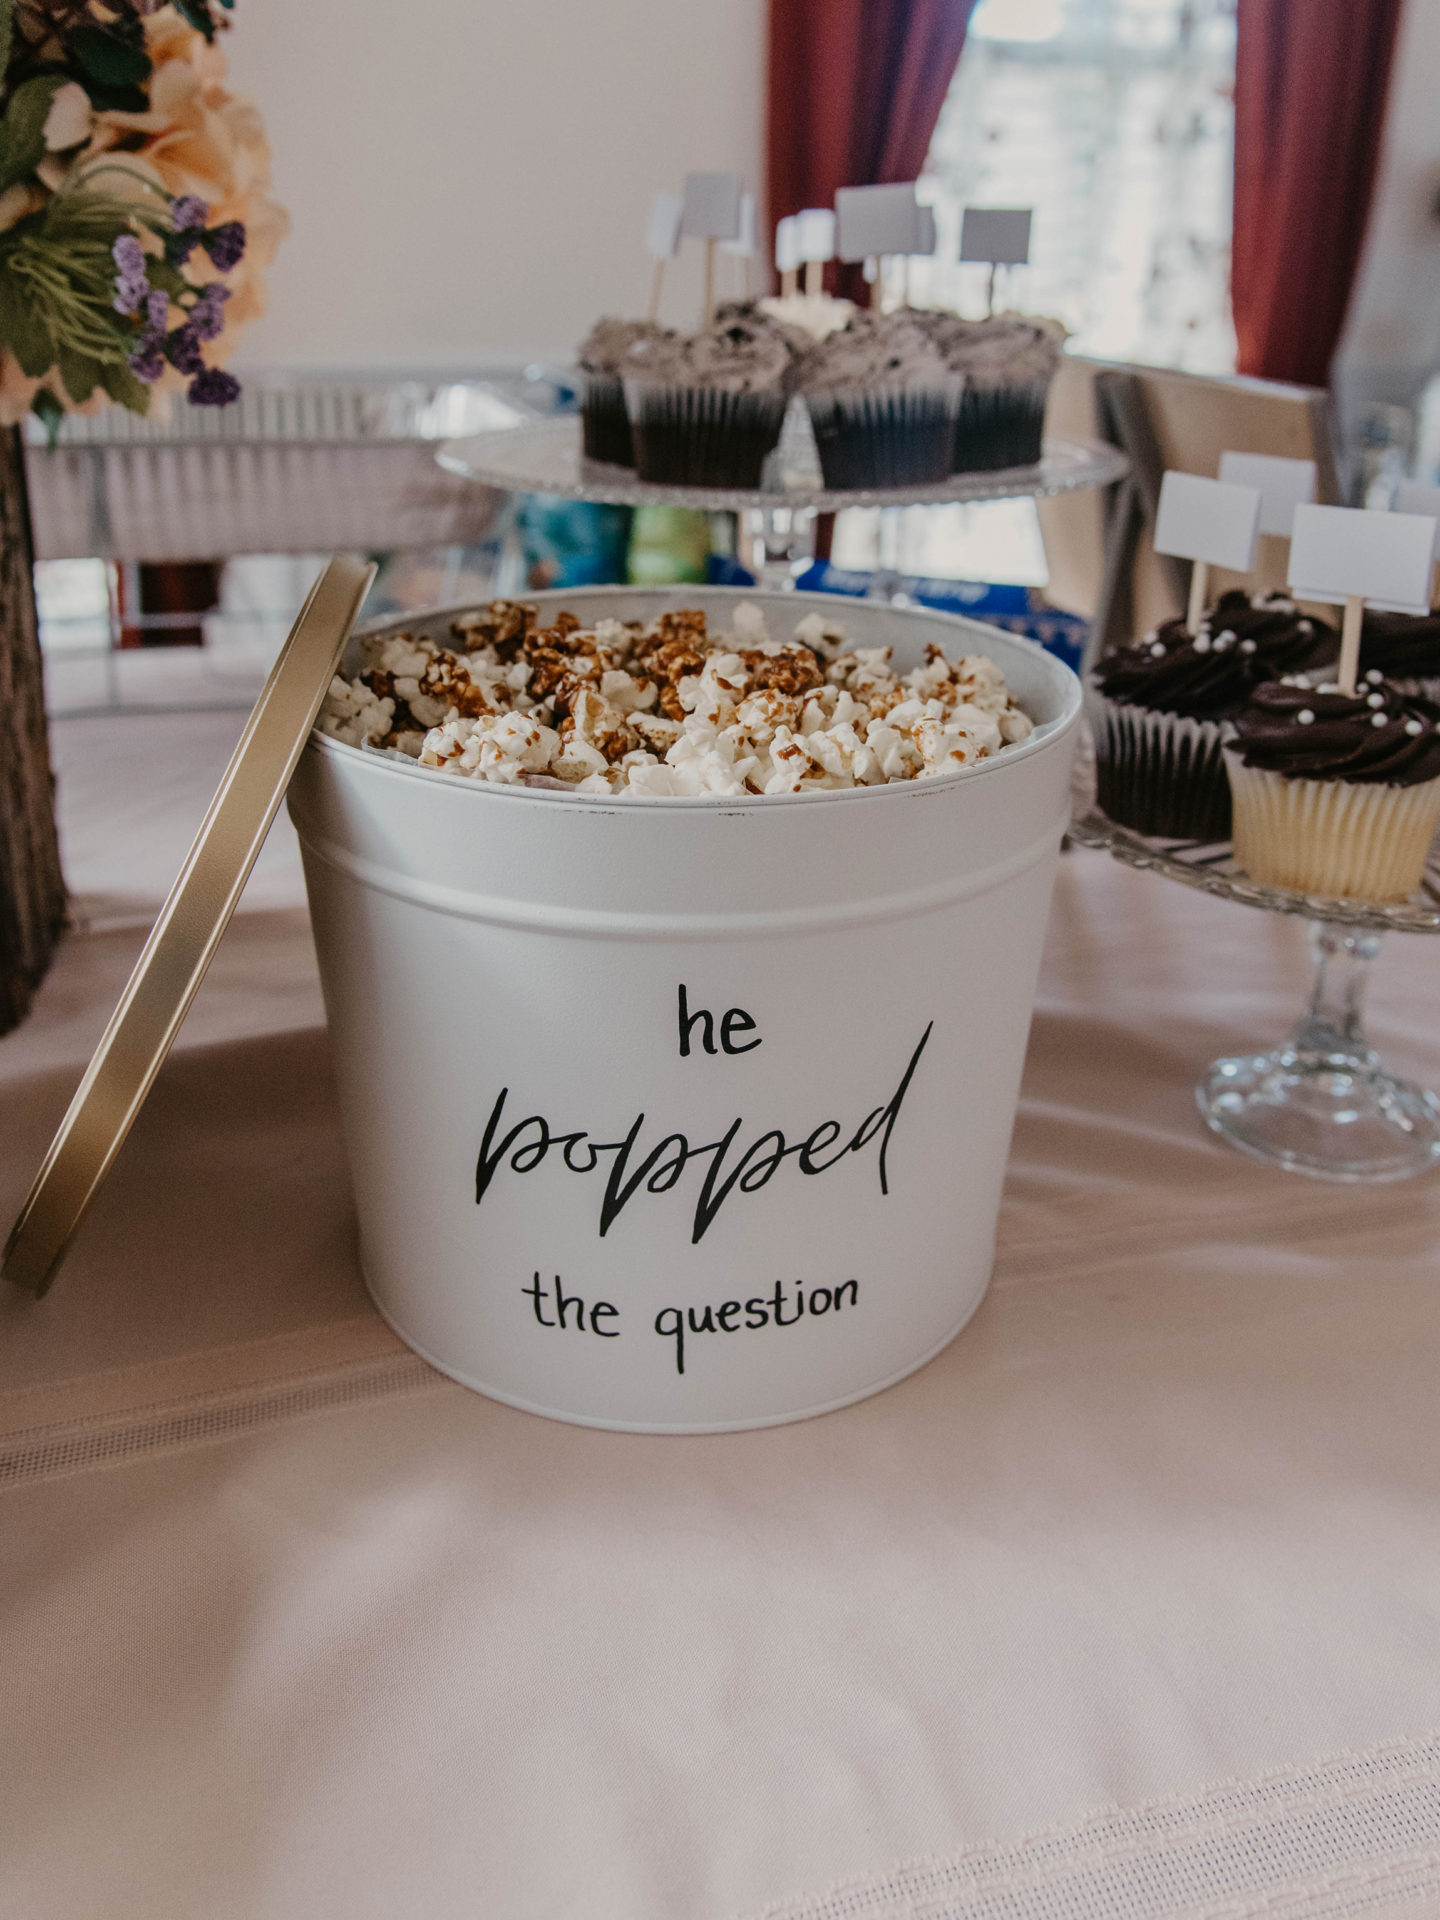 Engagement Party Favors Your Guests Will Love